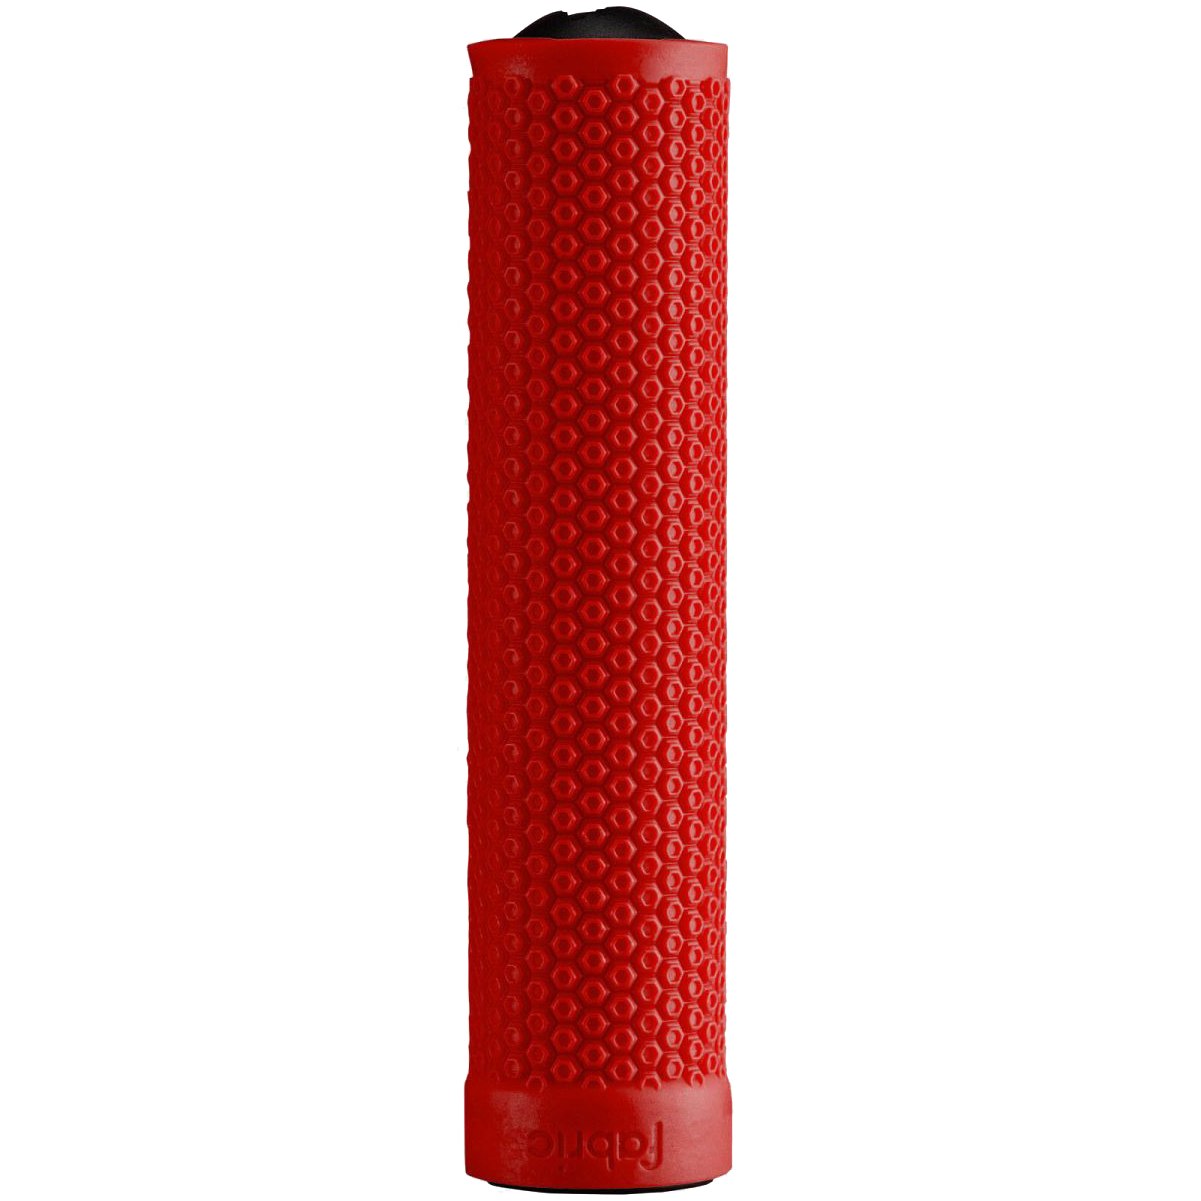 Picture of Fabric AM Handlebar Grips - red